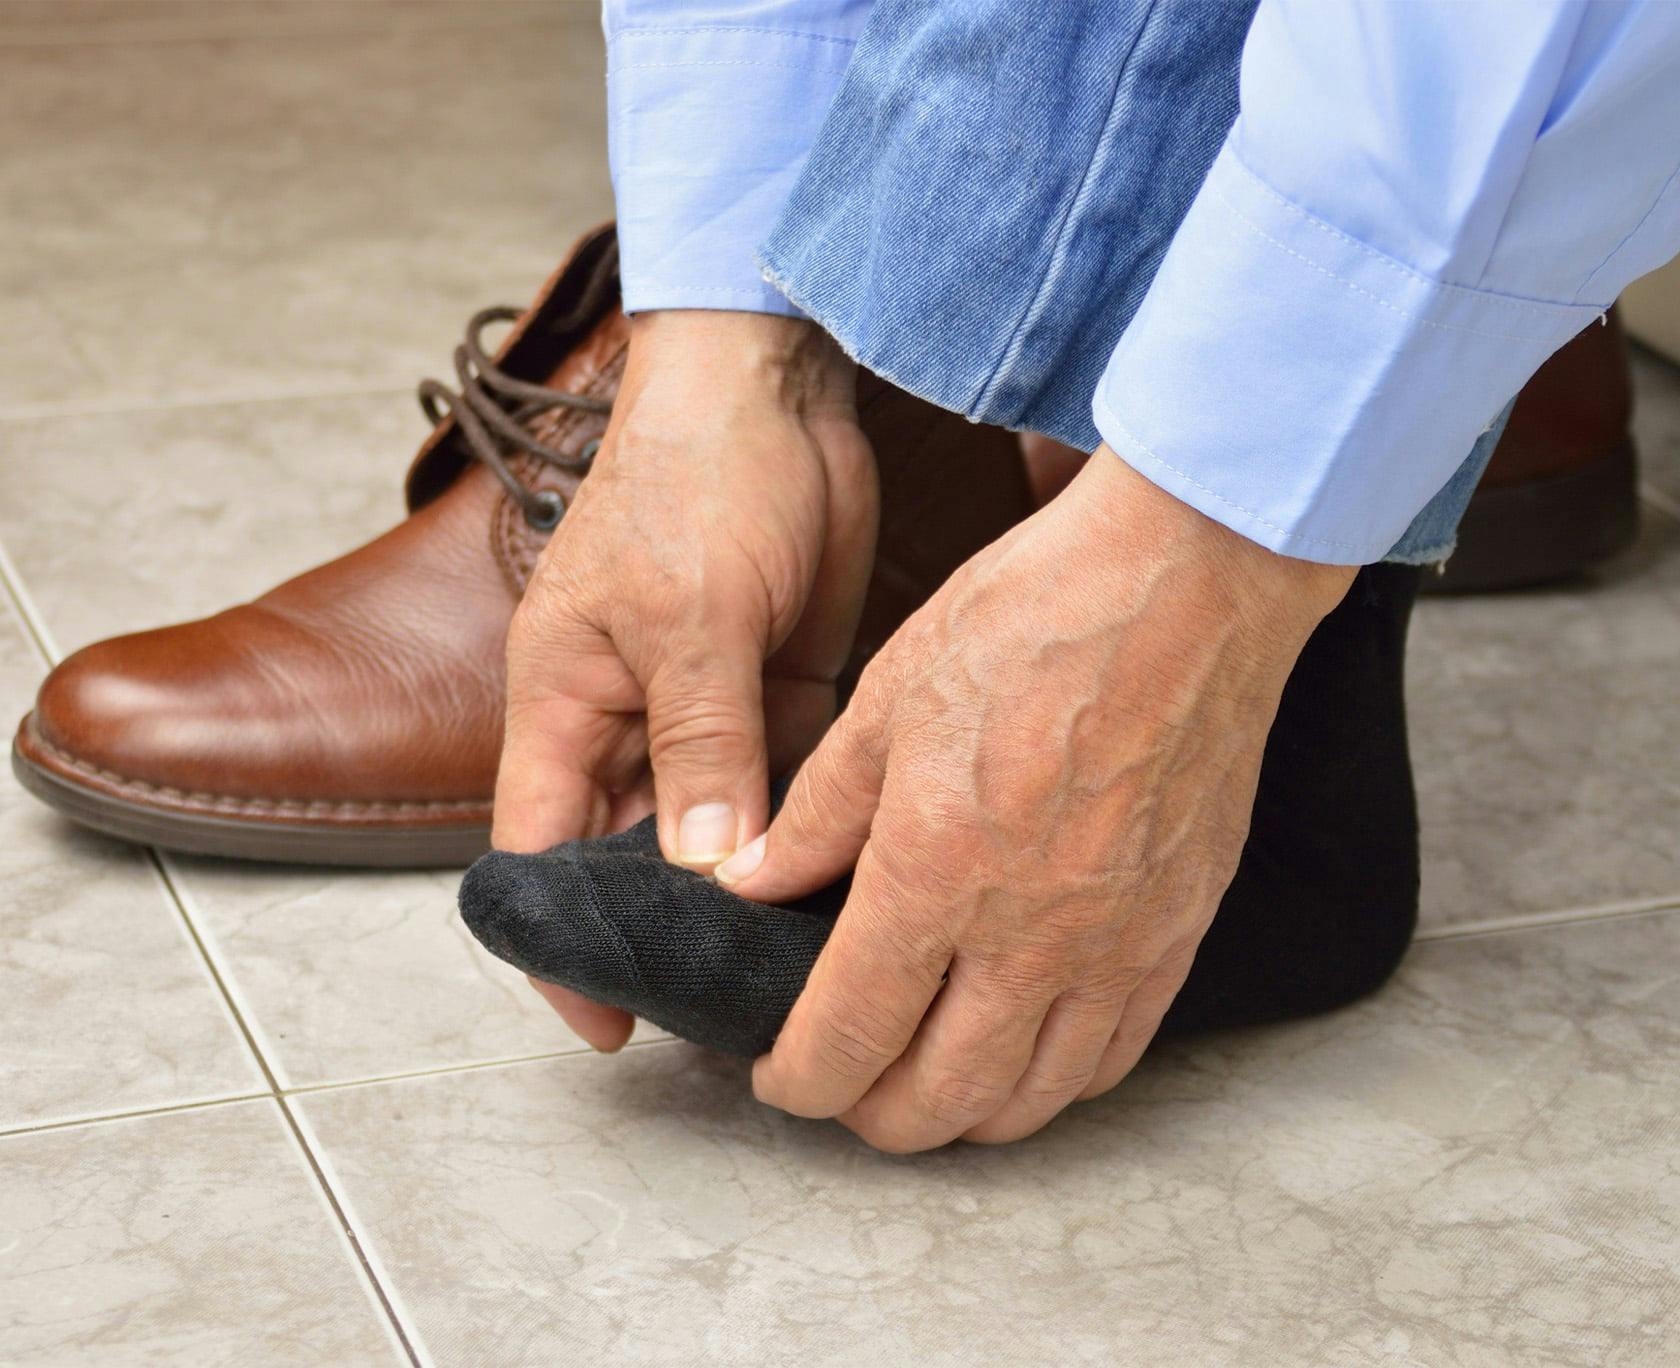 Man with his shoe off, grabbing his foot with both hands